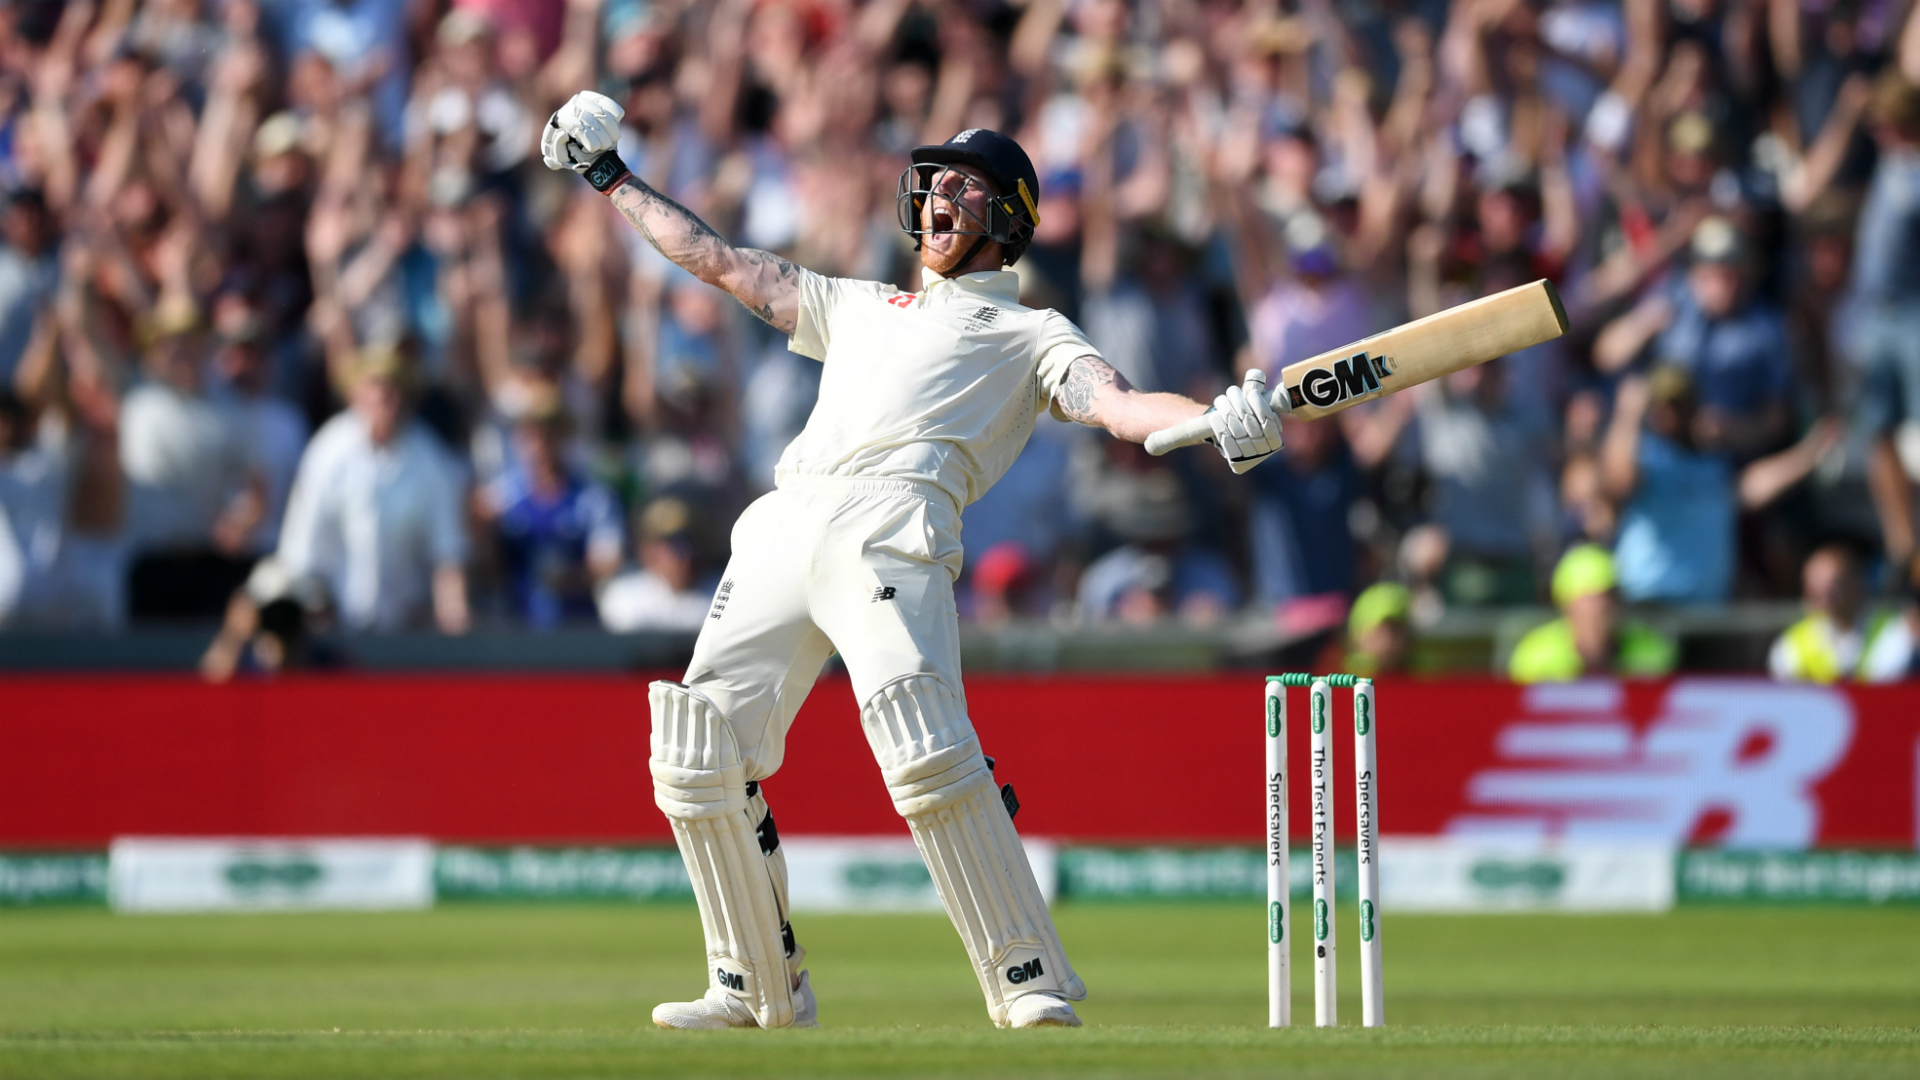 It was one of the greatest turnarounds in Ashes history. Here we look at how day four of the third Test at Headingley unfolded.